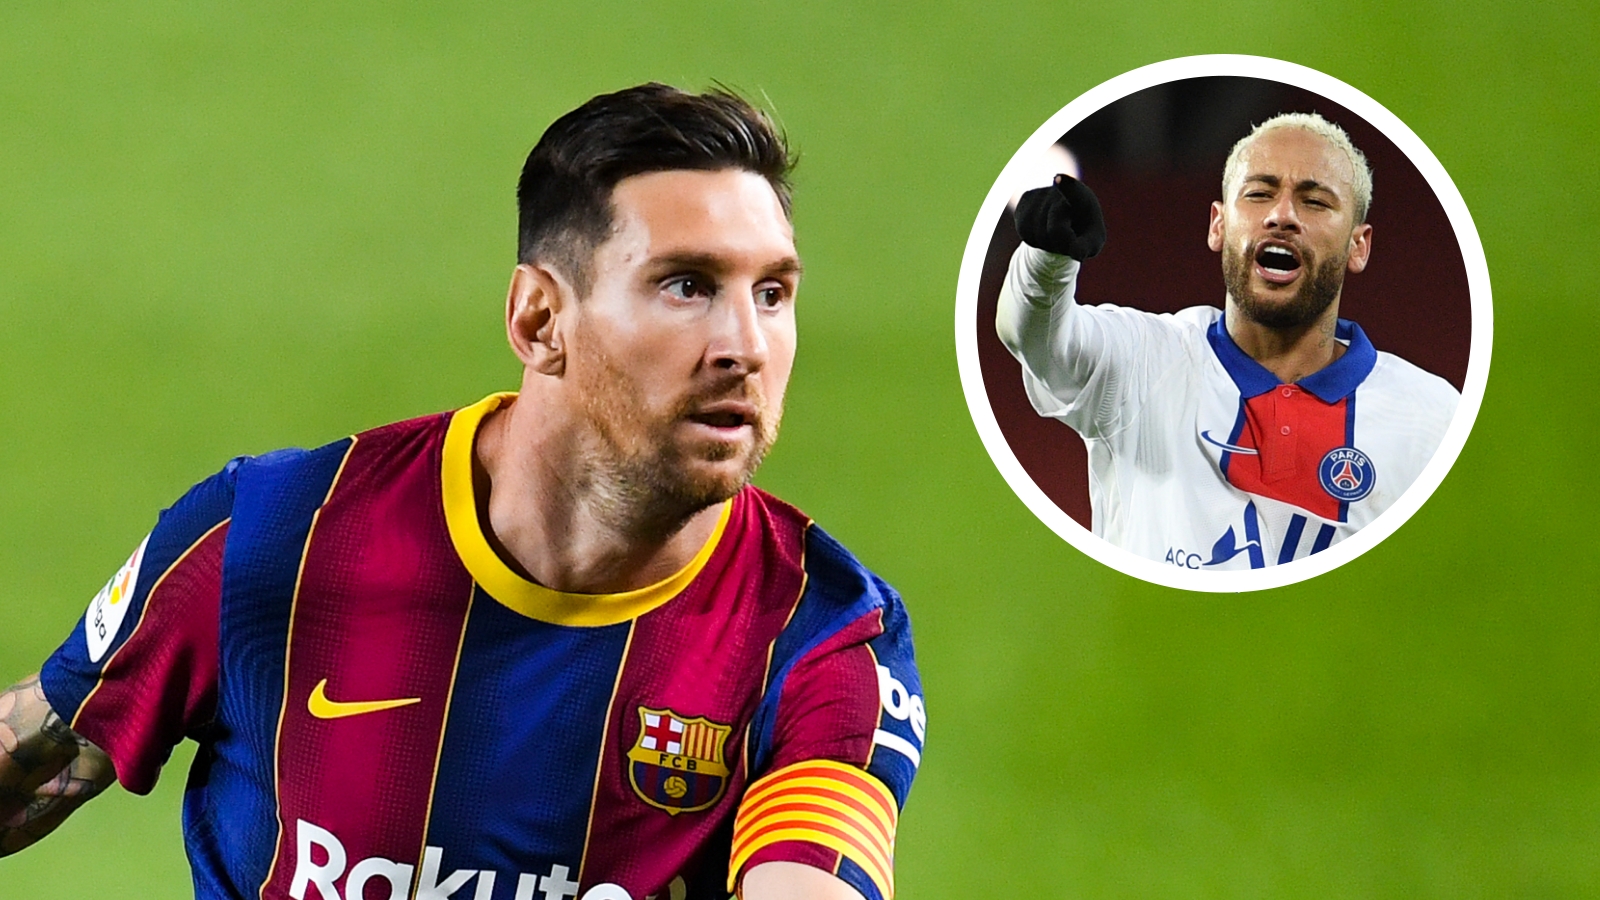 ‘Neymar reunion at PSG would be good for Messi’ – Rivaldo backing Barcelona exit for Argentine